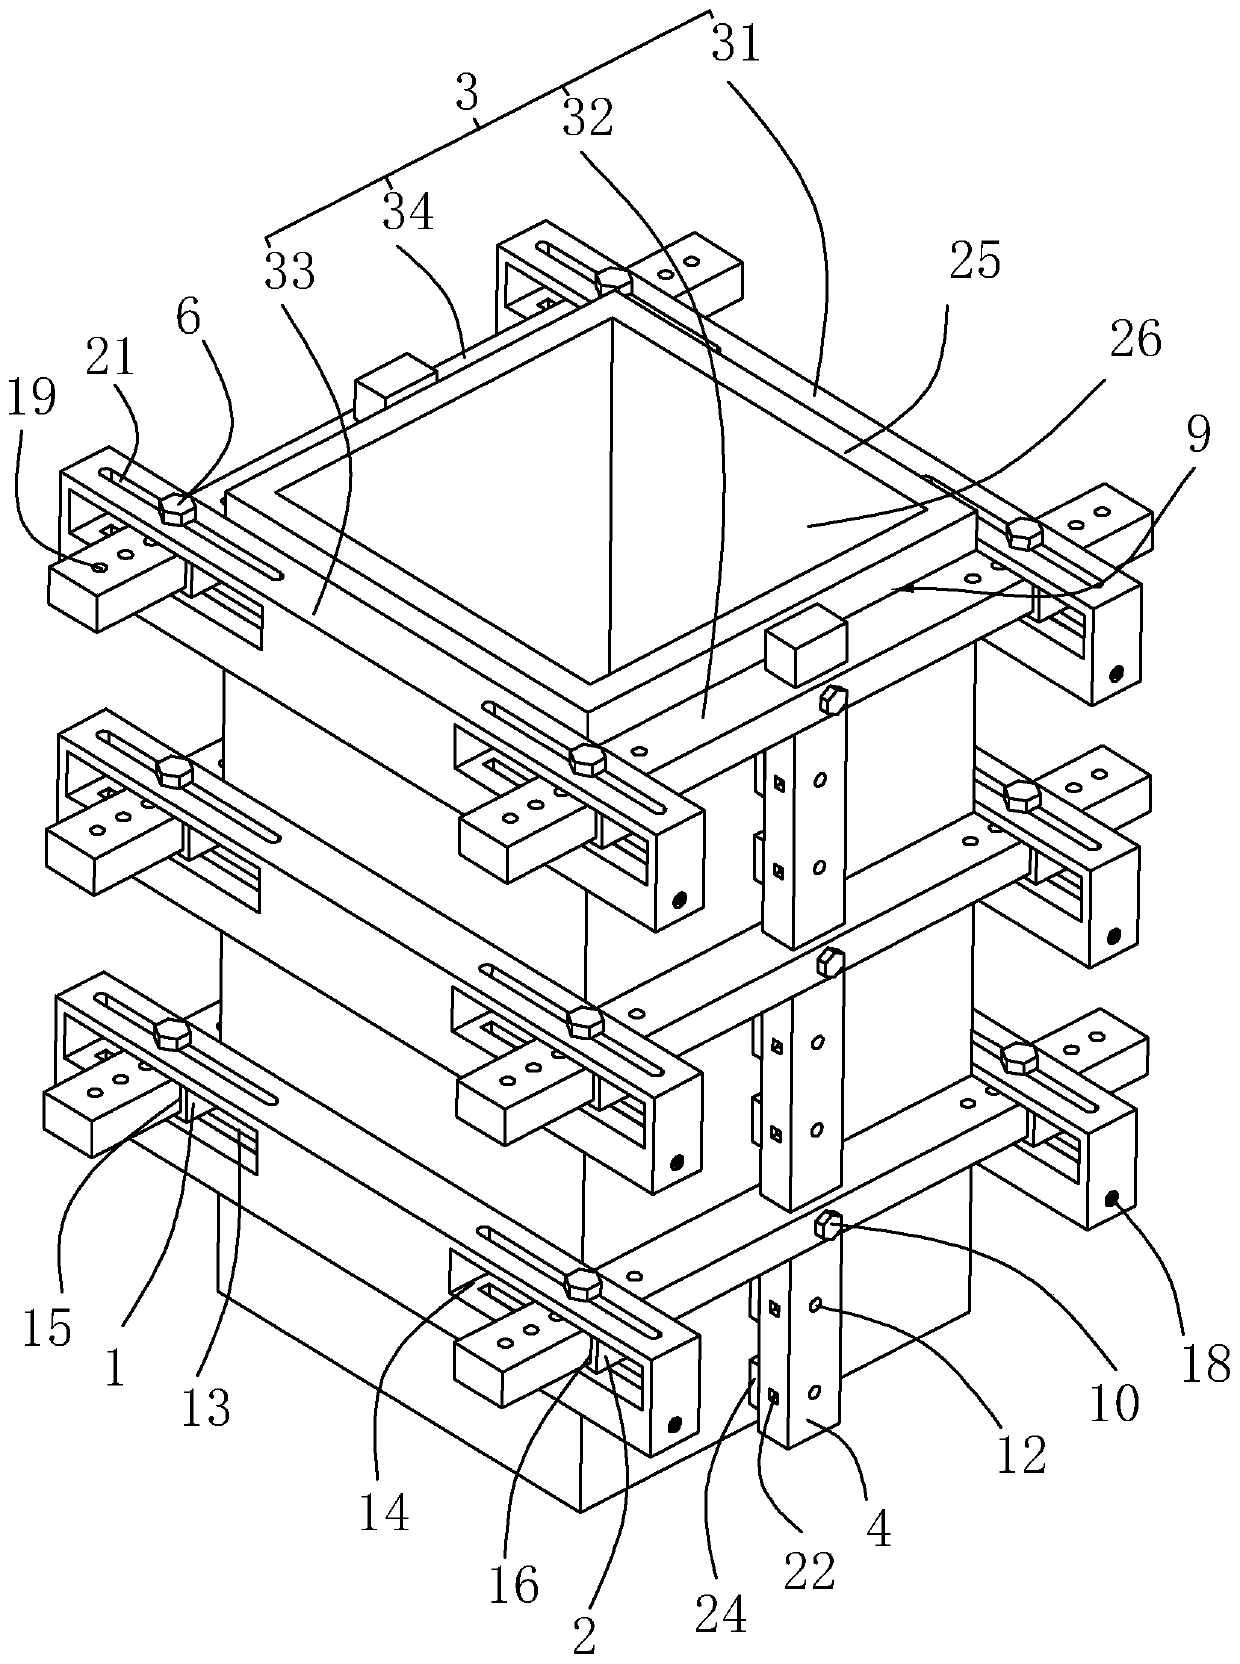 Fastening system for concrete rectangular column forms and construction method of concrete columns